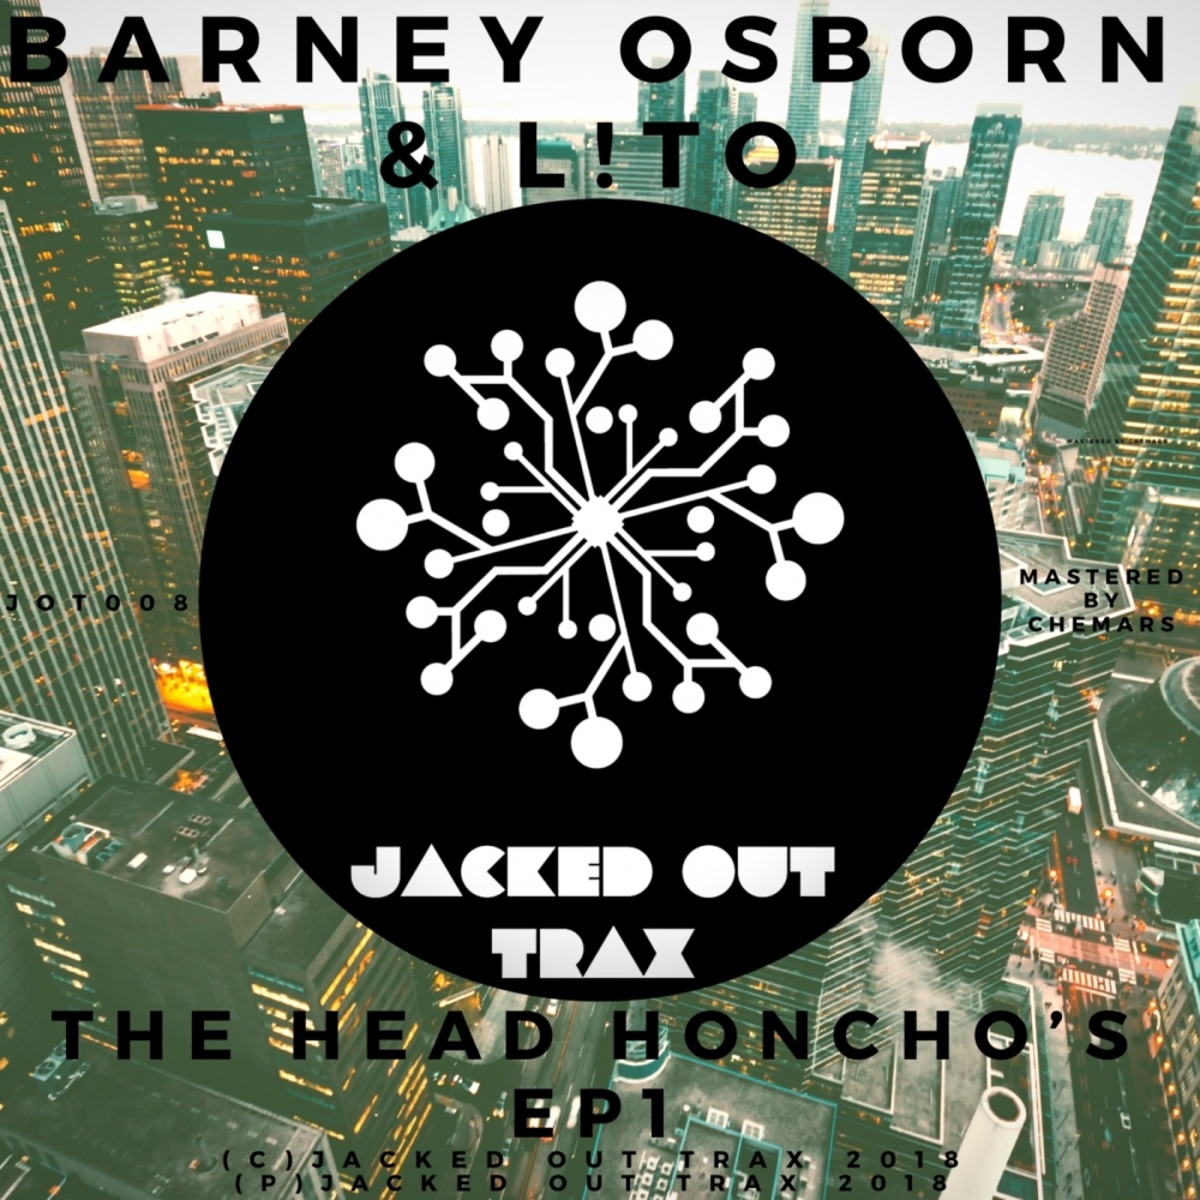 Barney Osborn & L!to - The Head Honcho's EP1 / Jacked Out Trax